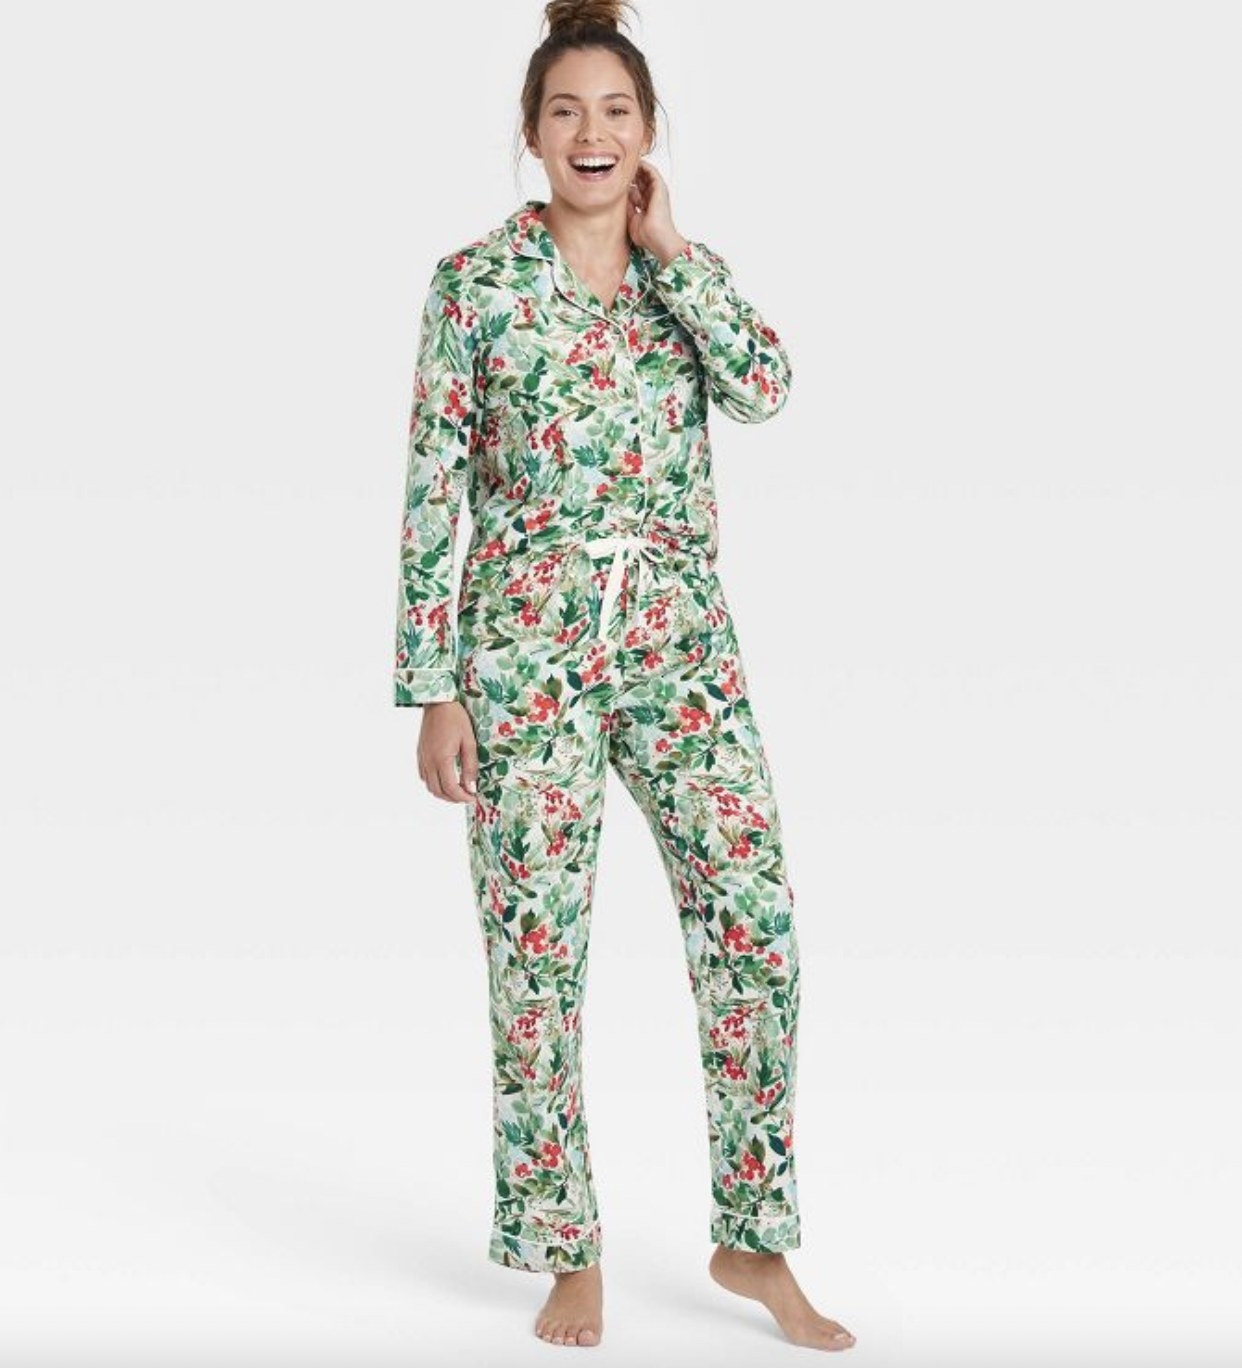 A person wearing a floral pajama set